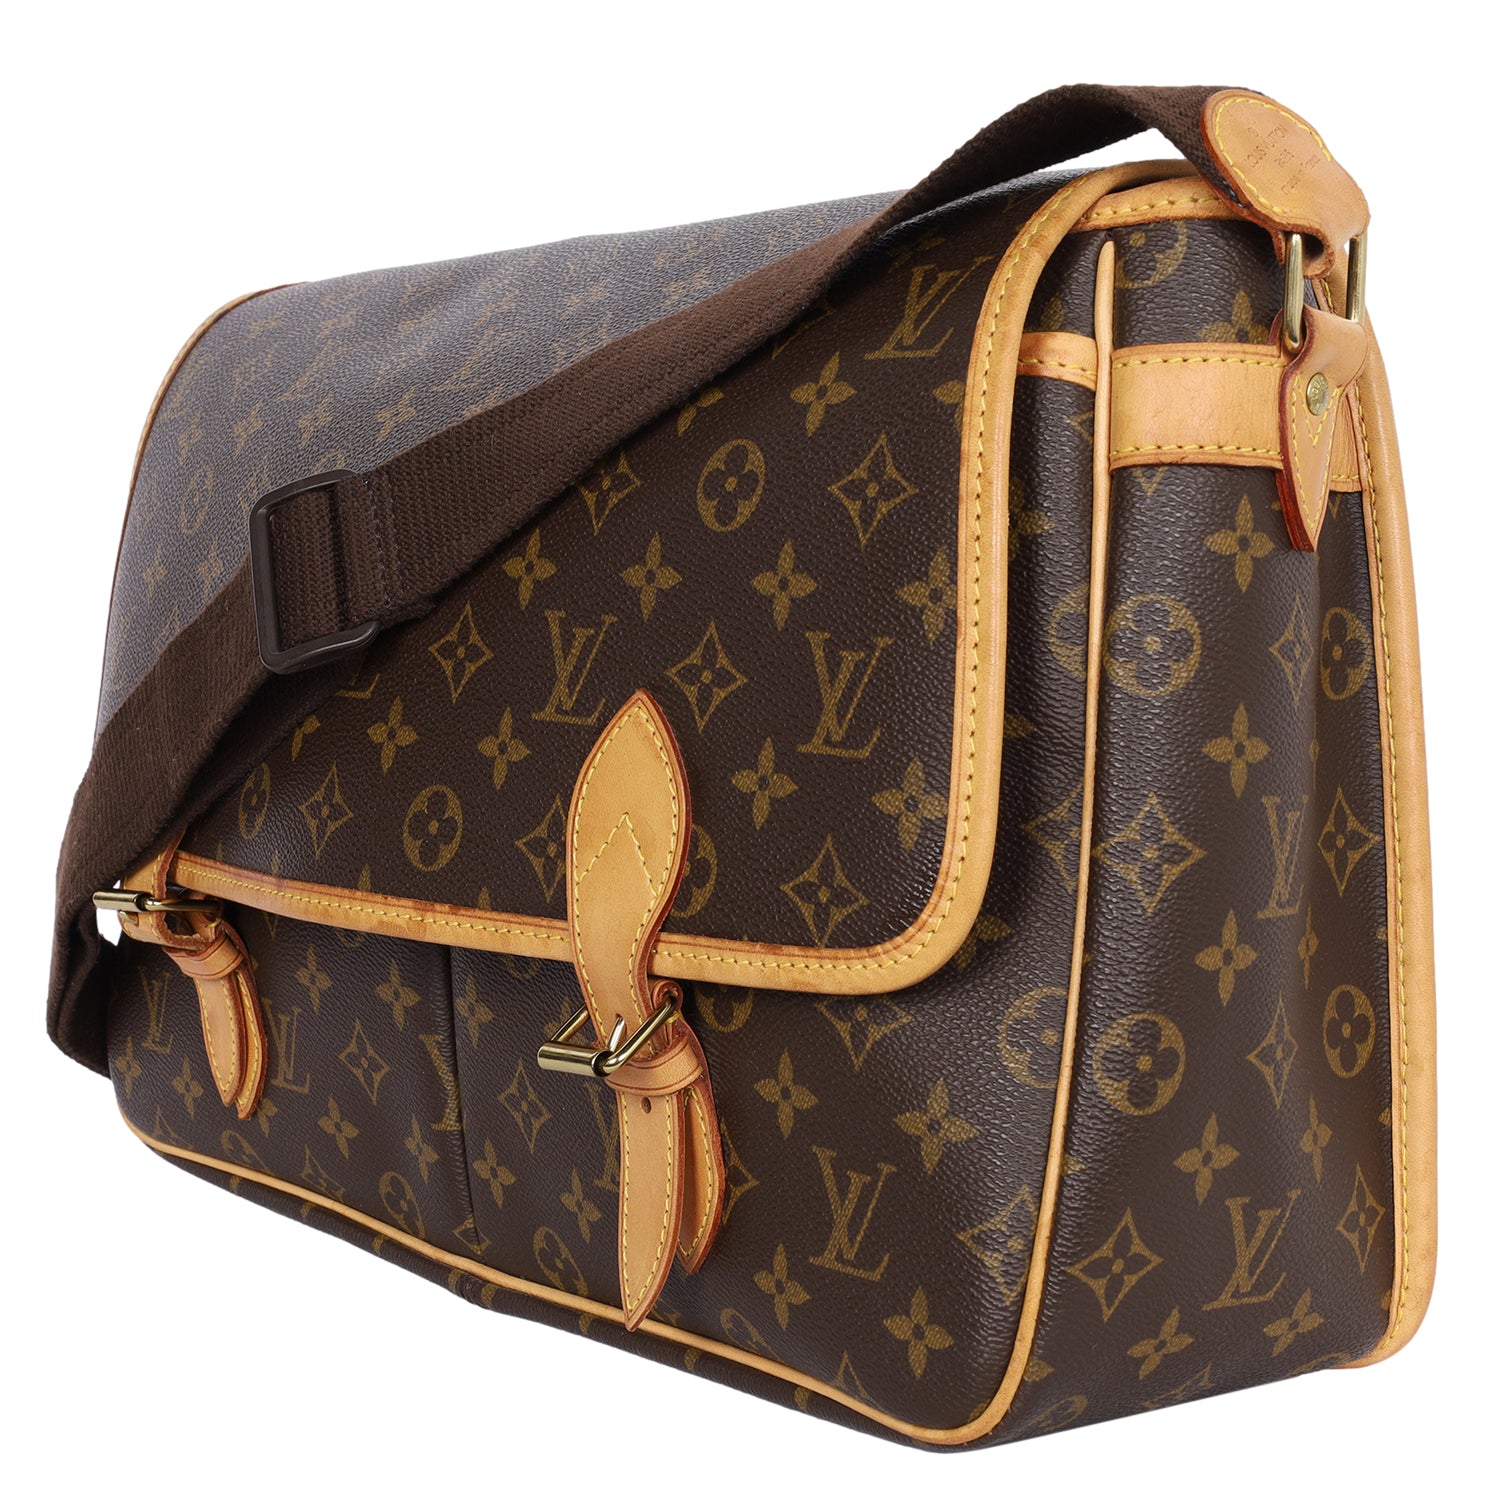 Shop for Louis Vuitton Monogram Canvas Leather Gibeciere GM Messenger Bag -  Shipped from USA